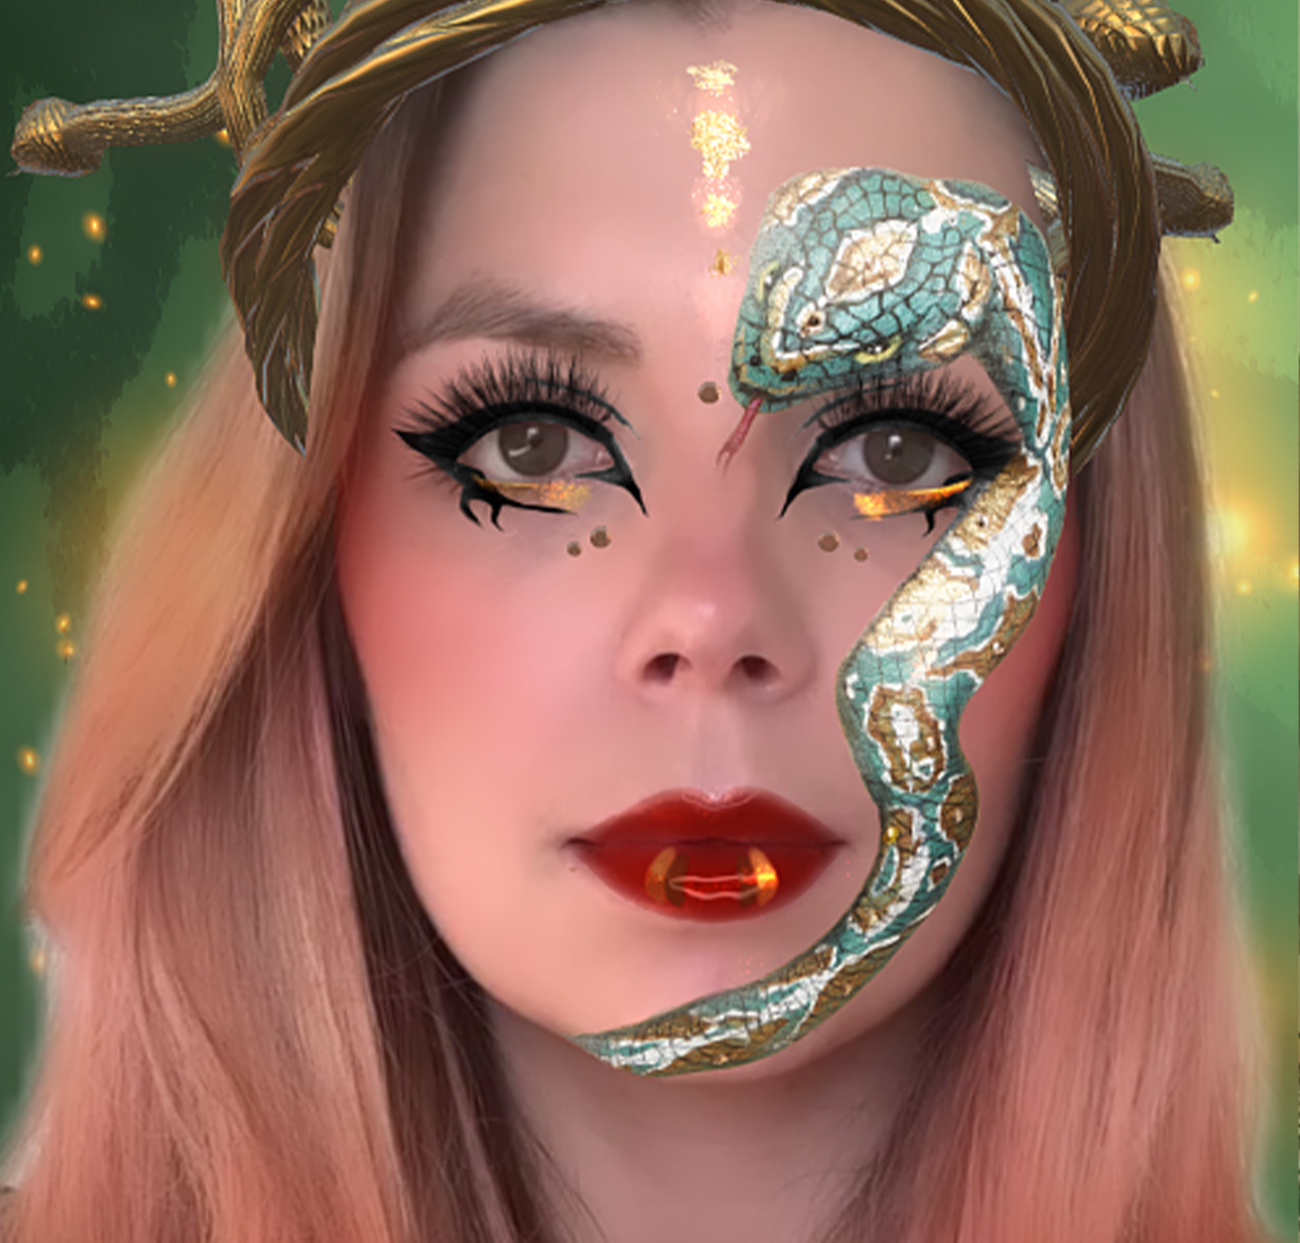 Augmented Reality makeup for an Instagram filter for the Halloween campaign ofthe brand NYX Cosmetics